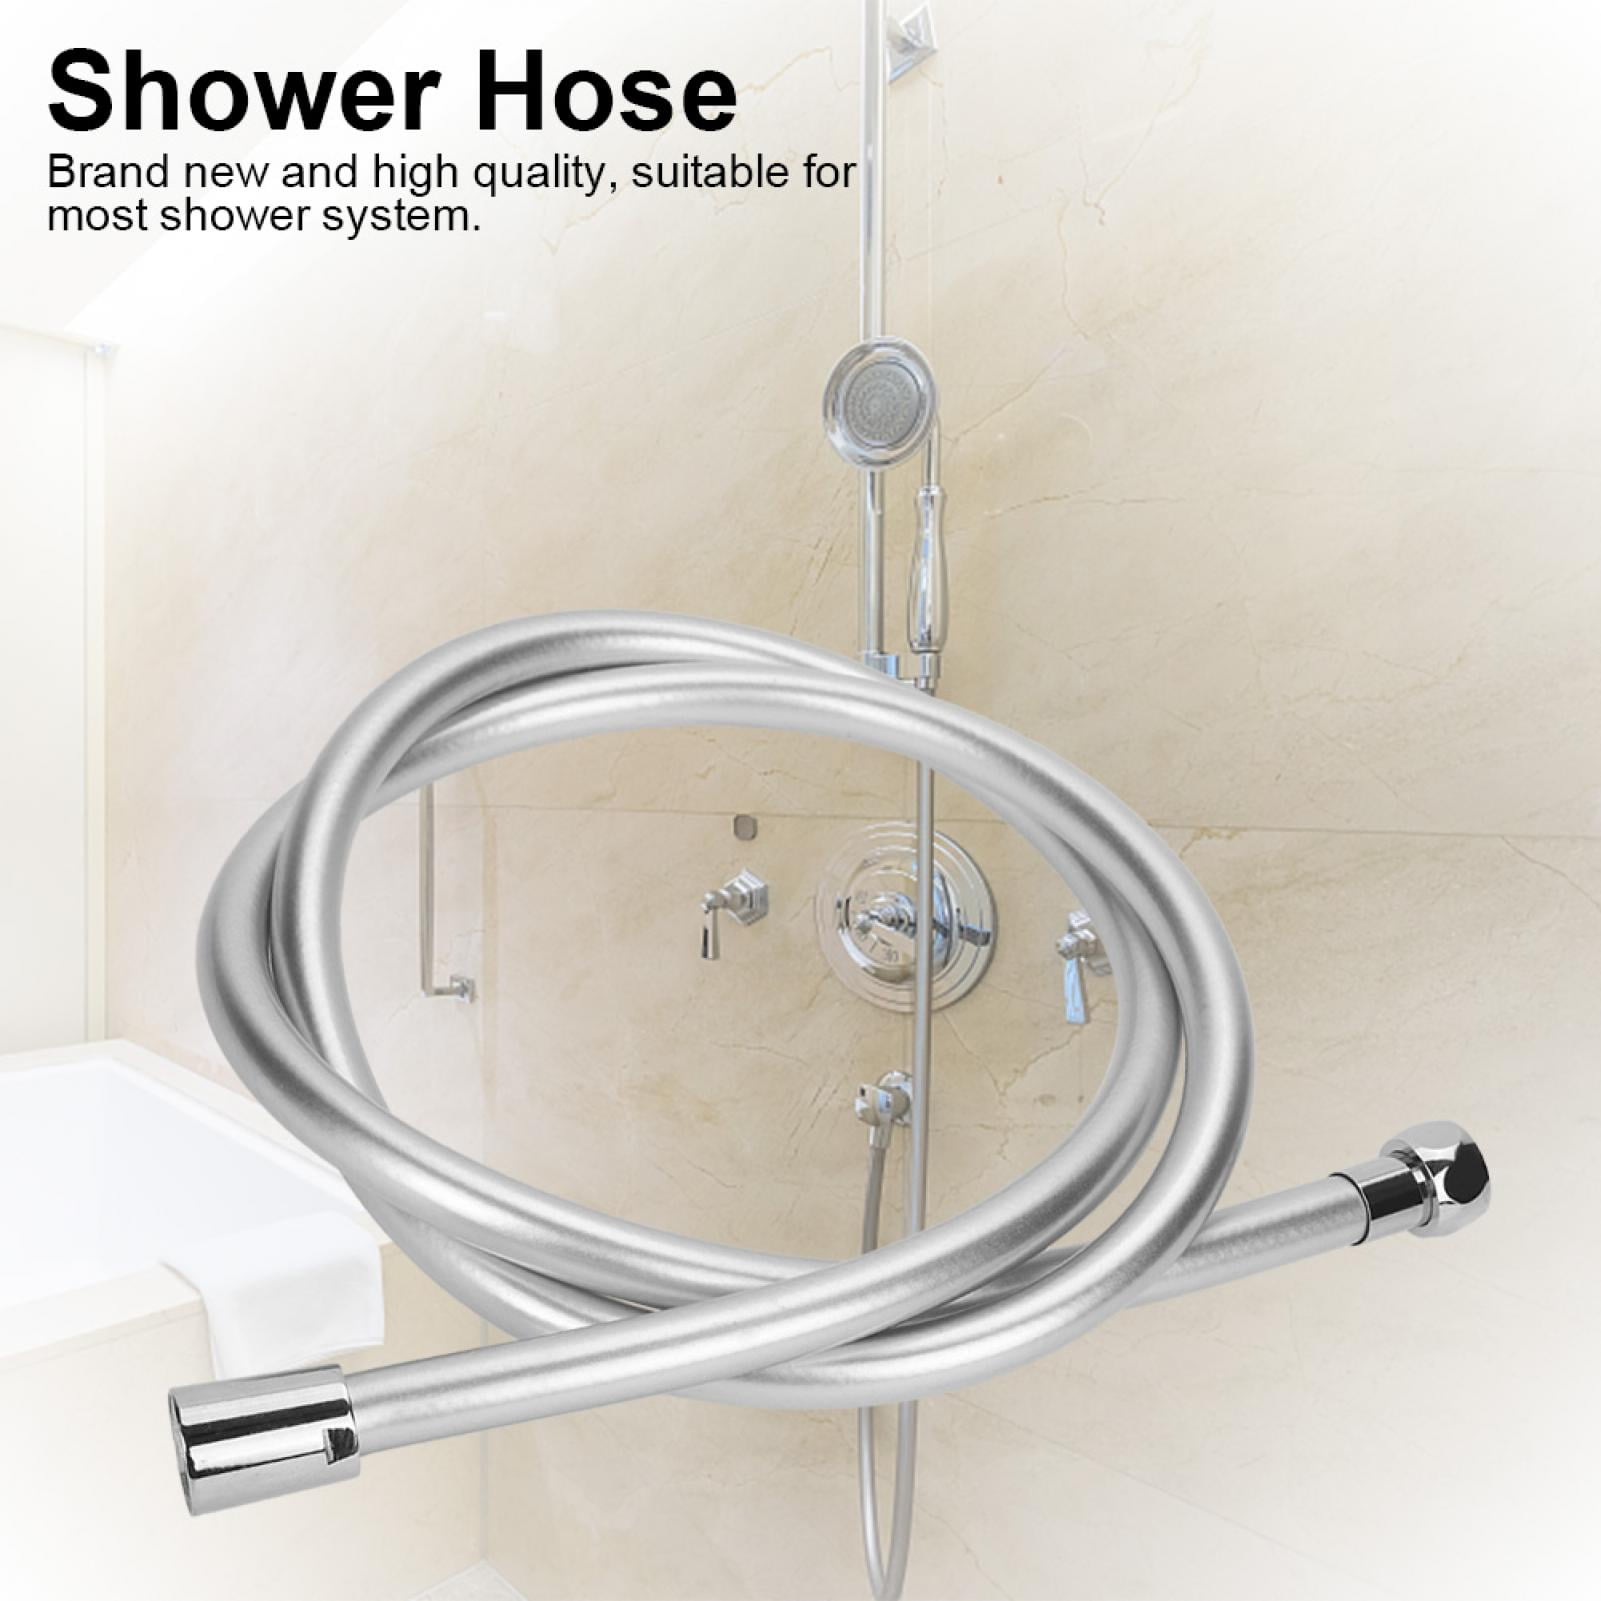 PVC Smooth Shower Hose 100 Inches Flexible Anti-Kink Handheld Shower Hea 